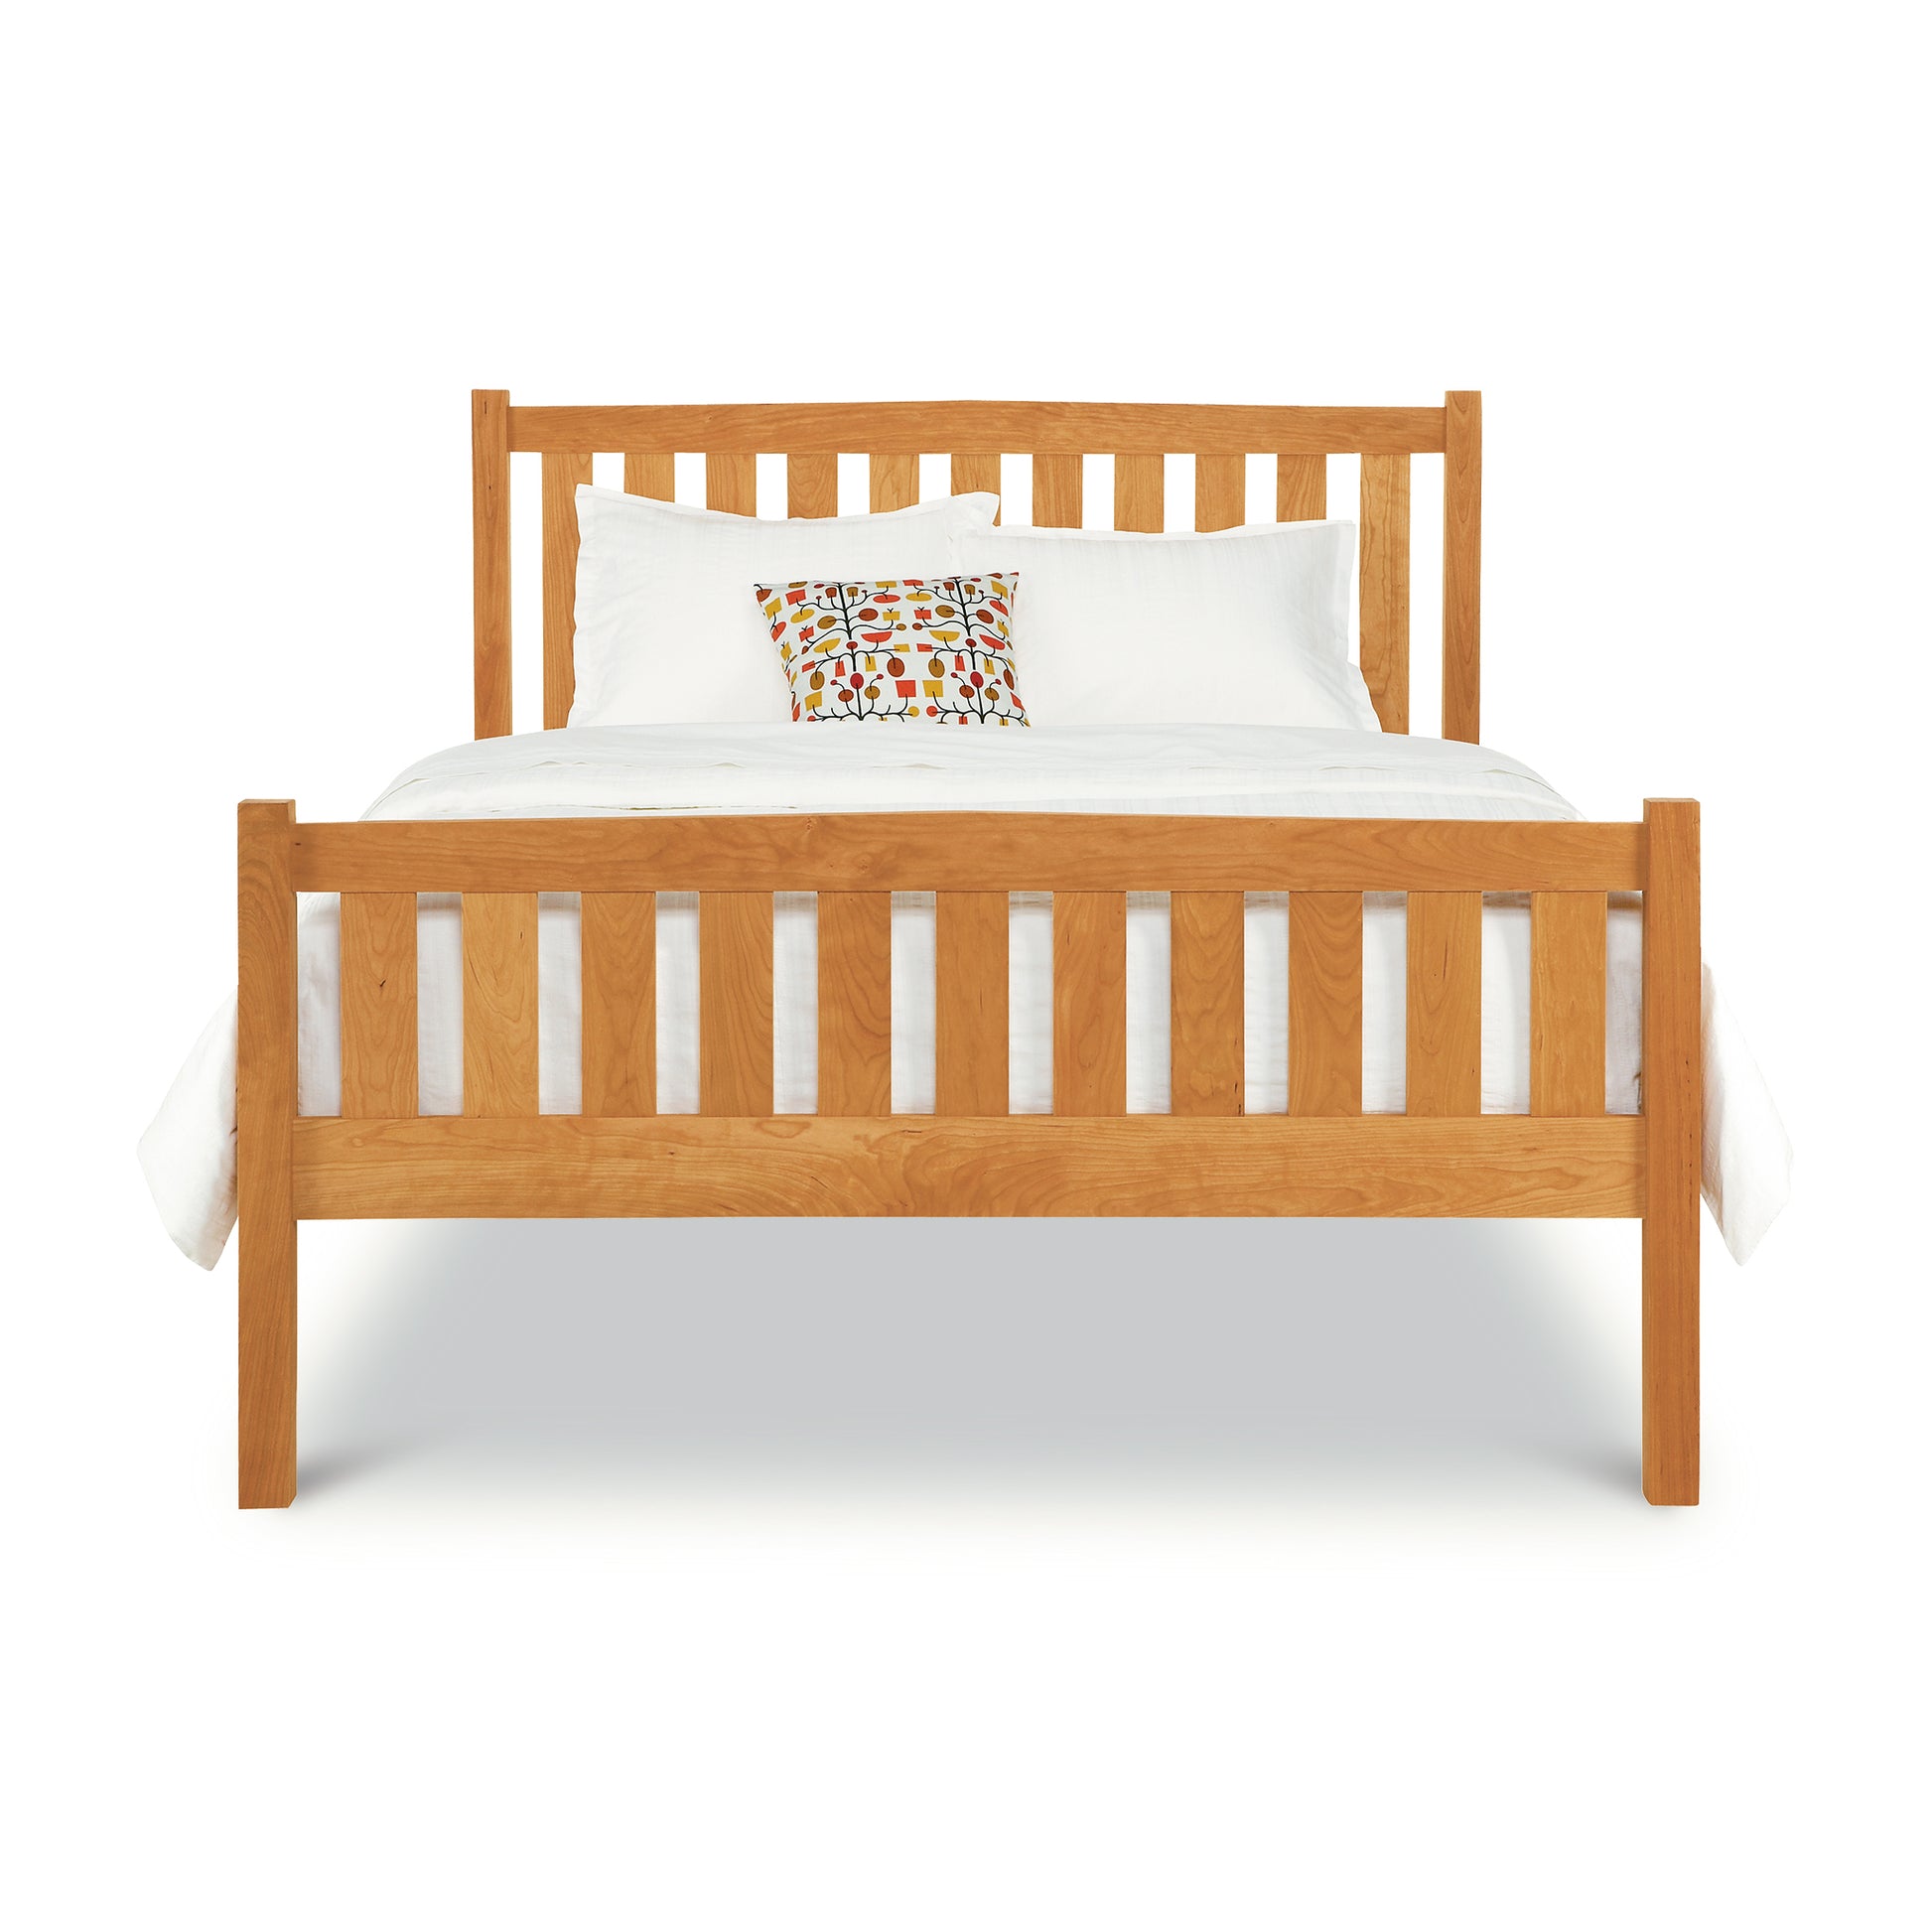 A Vermont Furniture Designs Bennington Bed with High Footboard with a white bedding set and a single decorative pillow against a white background.